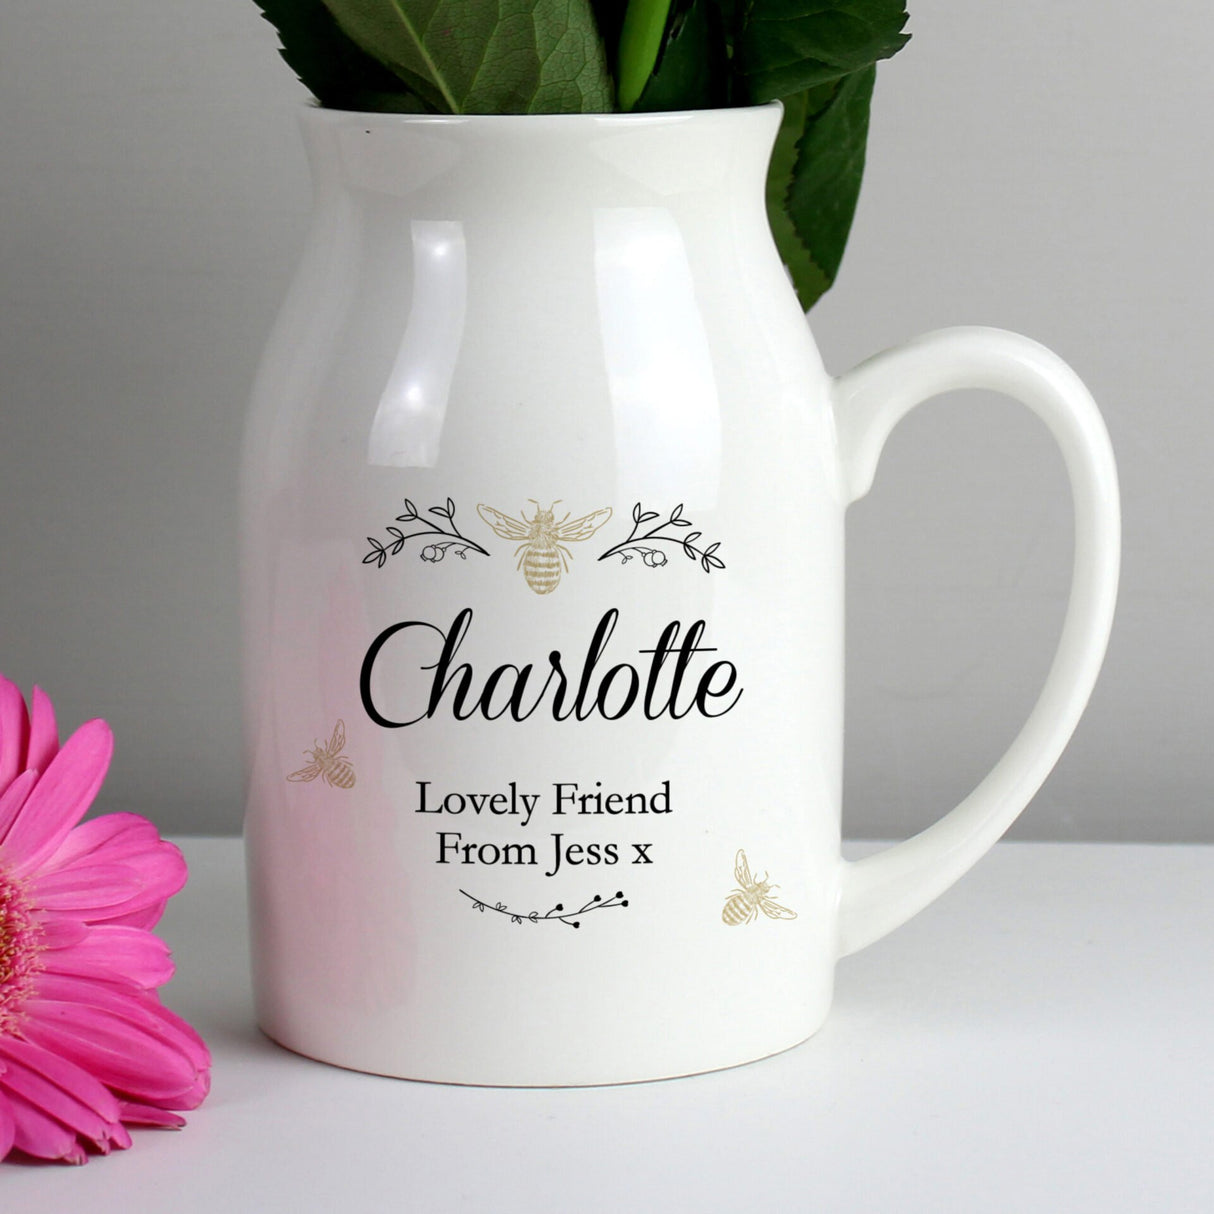 Floral Bee Flower Jug - Gift Moments